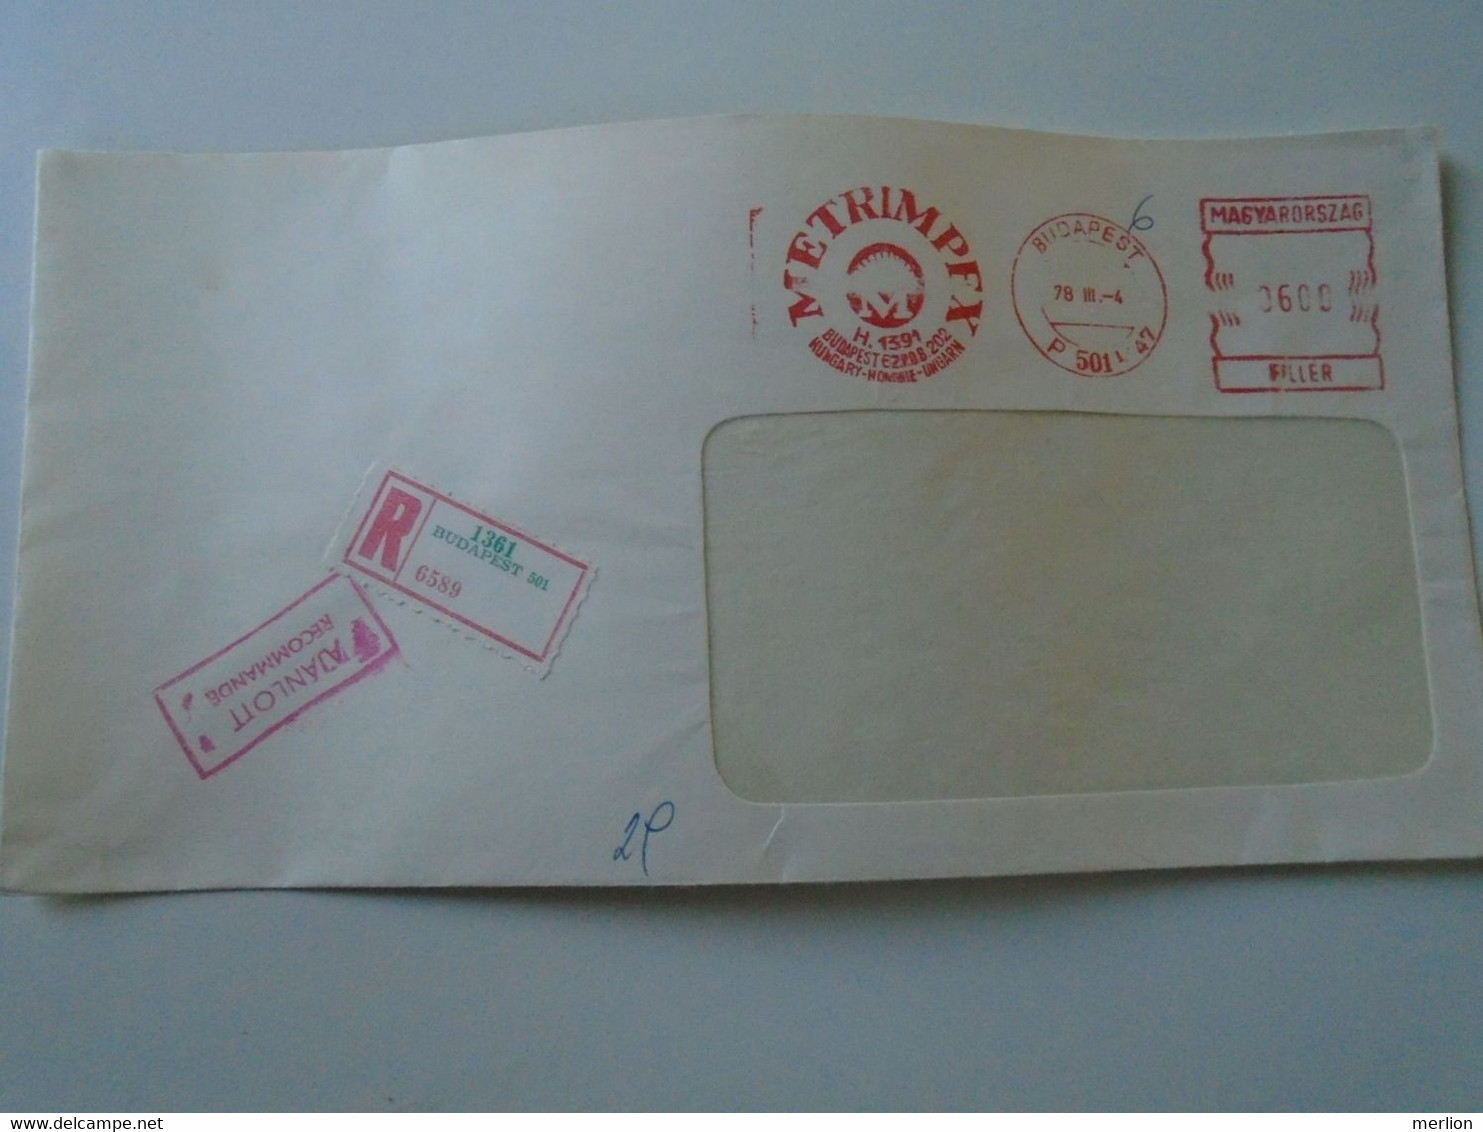 AD00012.52   Hungary Registered  Cover -EMA Red Meter Freistempel-1978 Metrimpex Budapest - Machine Labels [ATM]